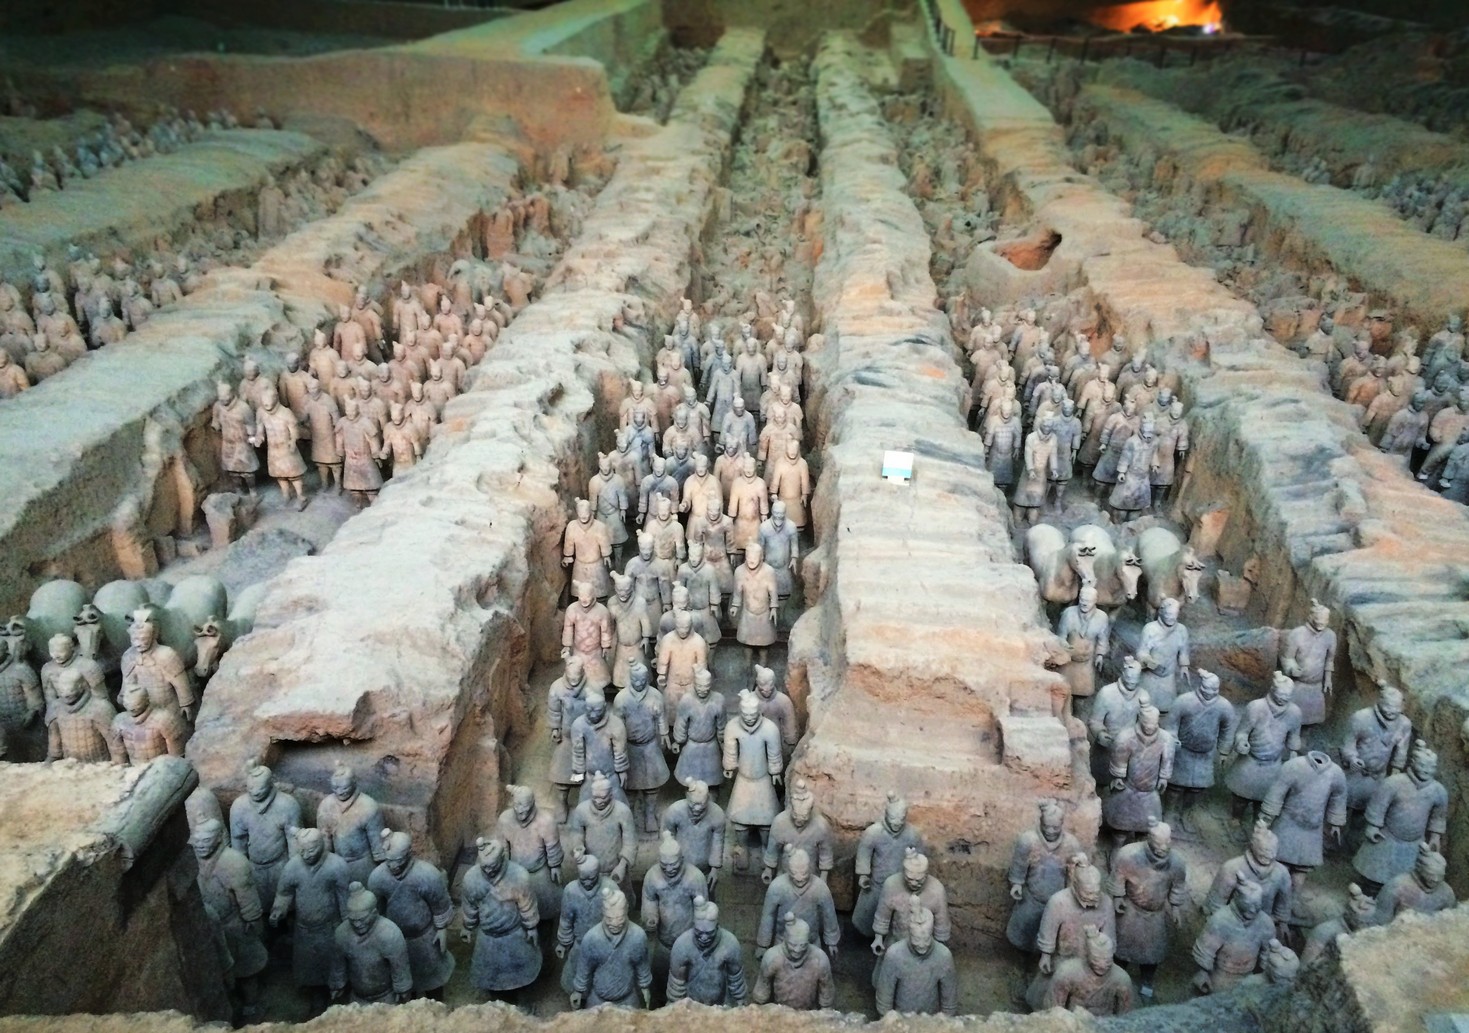 Visiting an archaeological dig site: the Terracotta Warriors of Xi’an, China